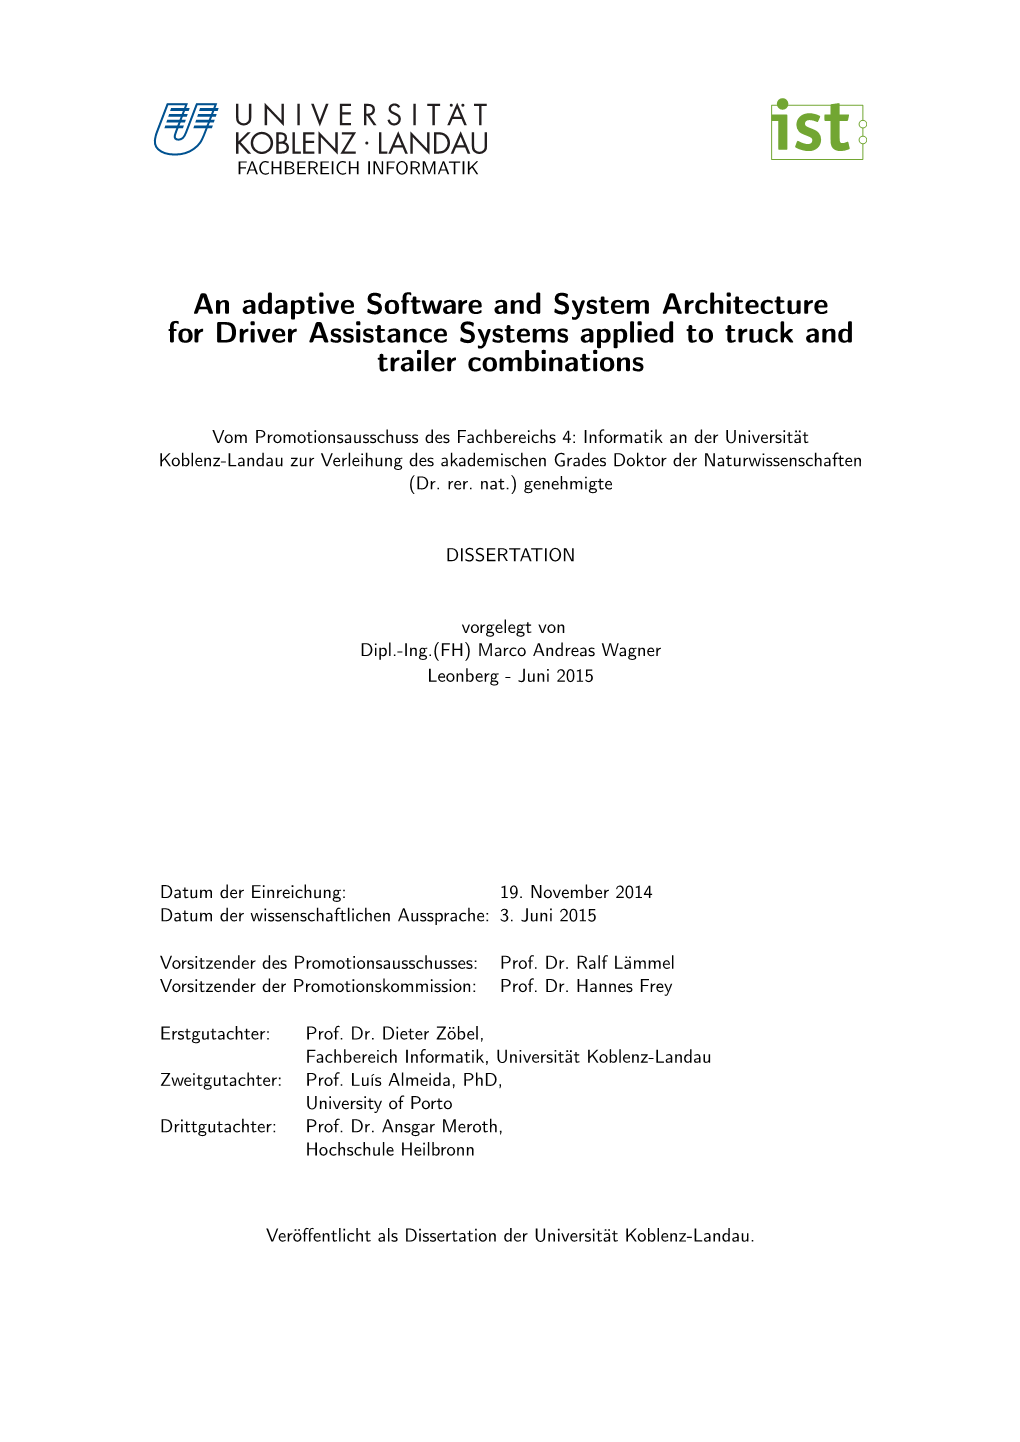 An Adaptive Software and System Architecture for Driver Assistance Systems Applied to Truck and Trailer Combinations